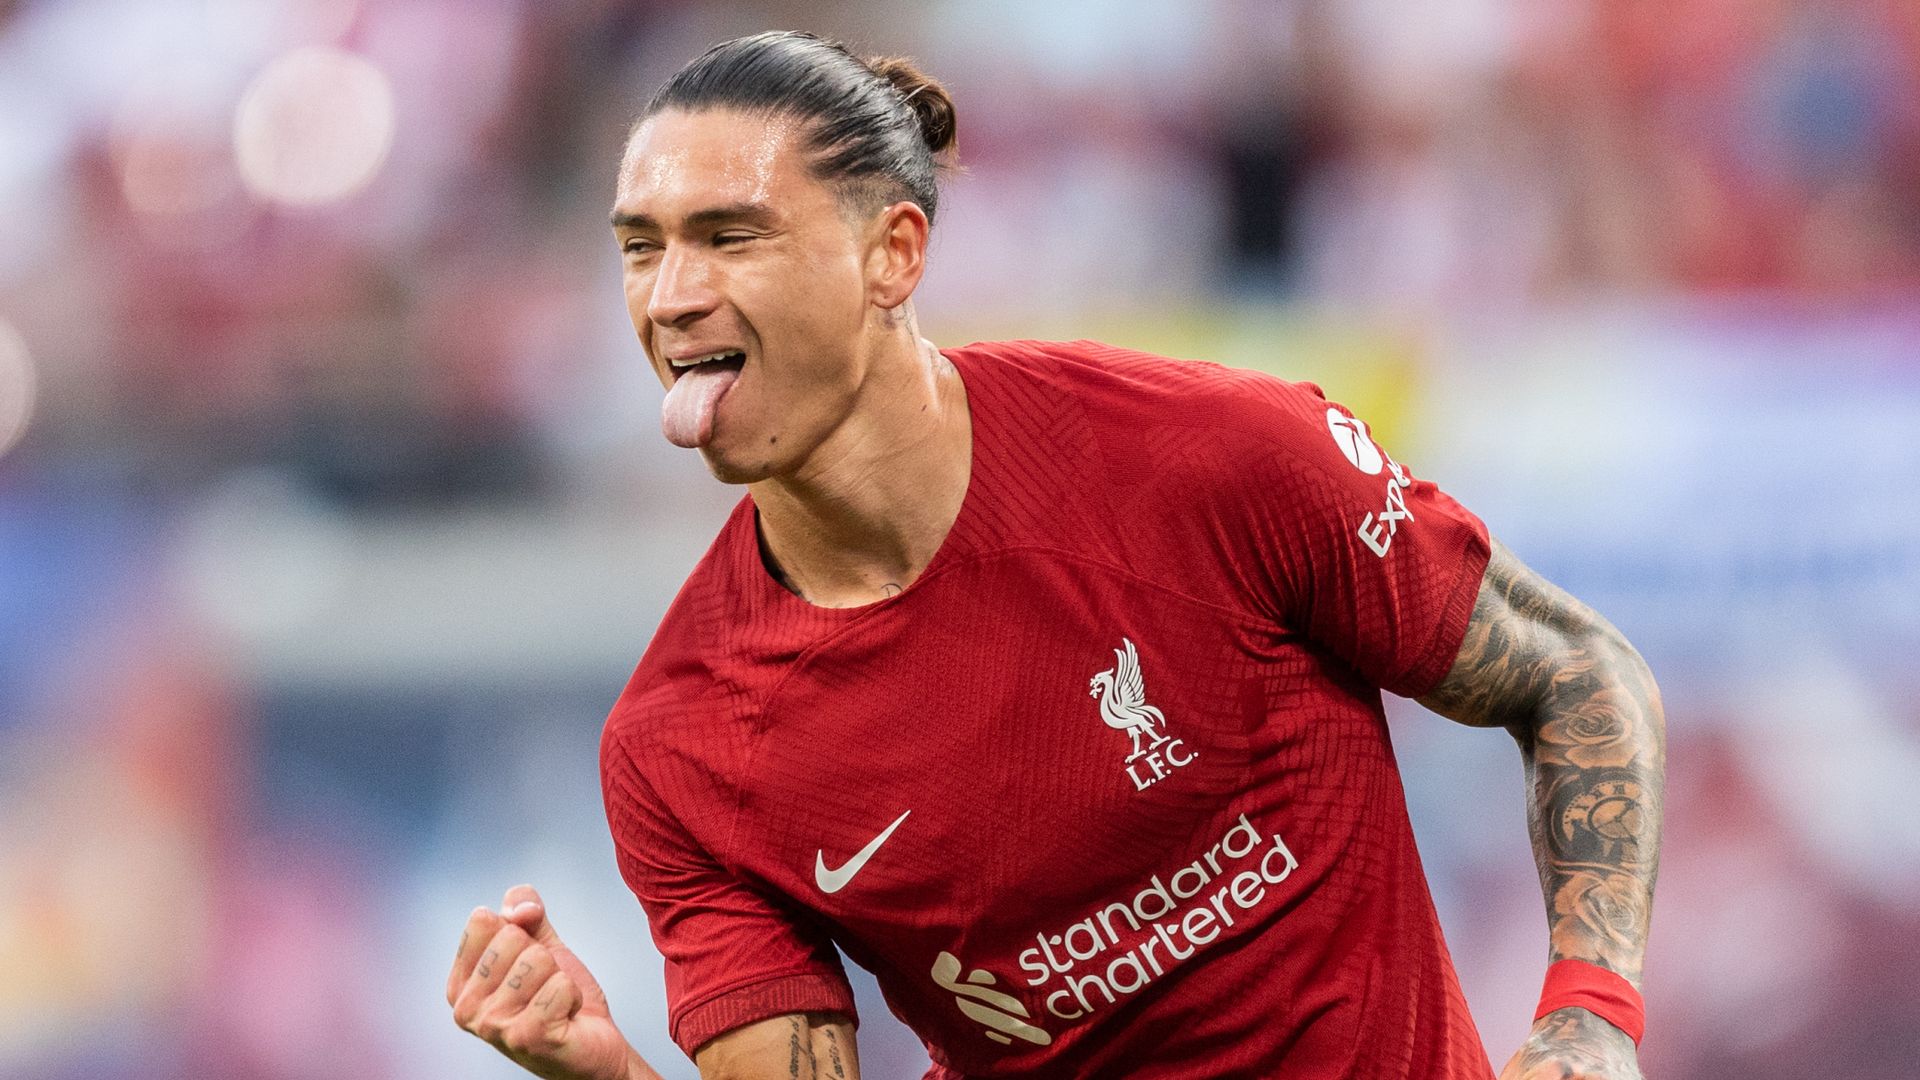 Pre-season LIVE! Liverpool take on RB Salzburg in their final friendly before the Community Shield